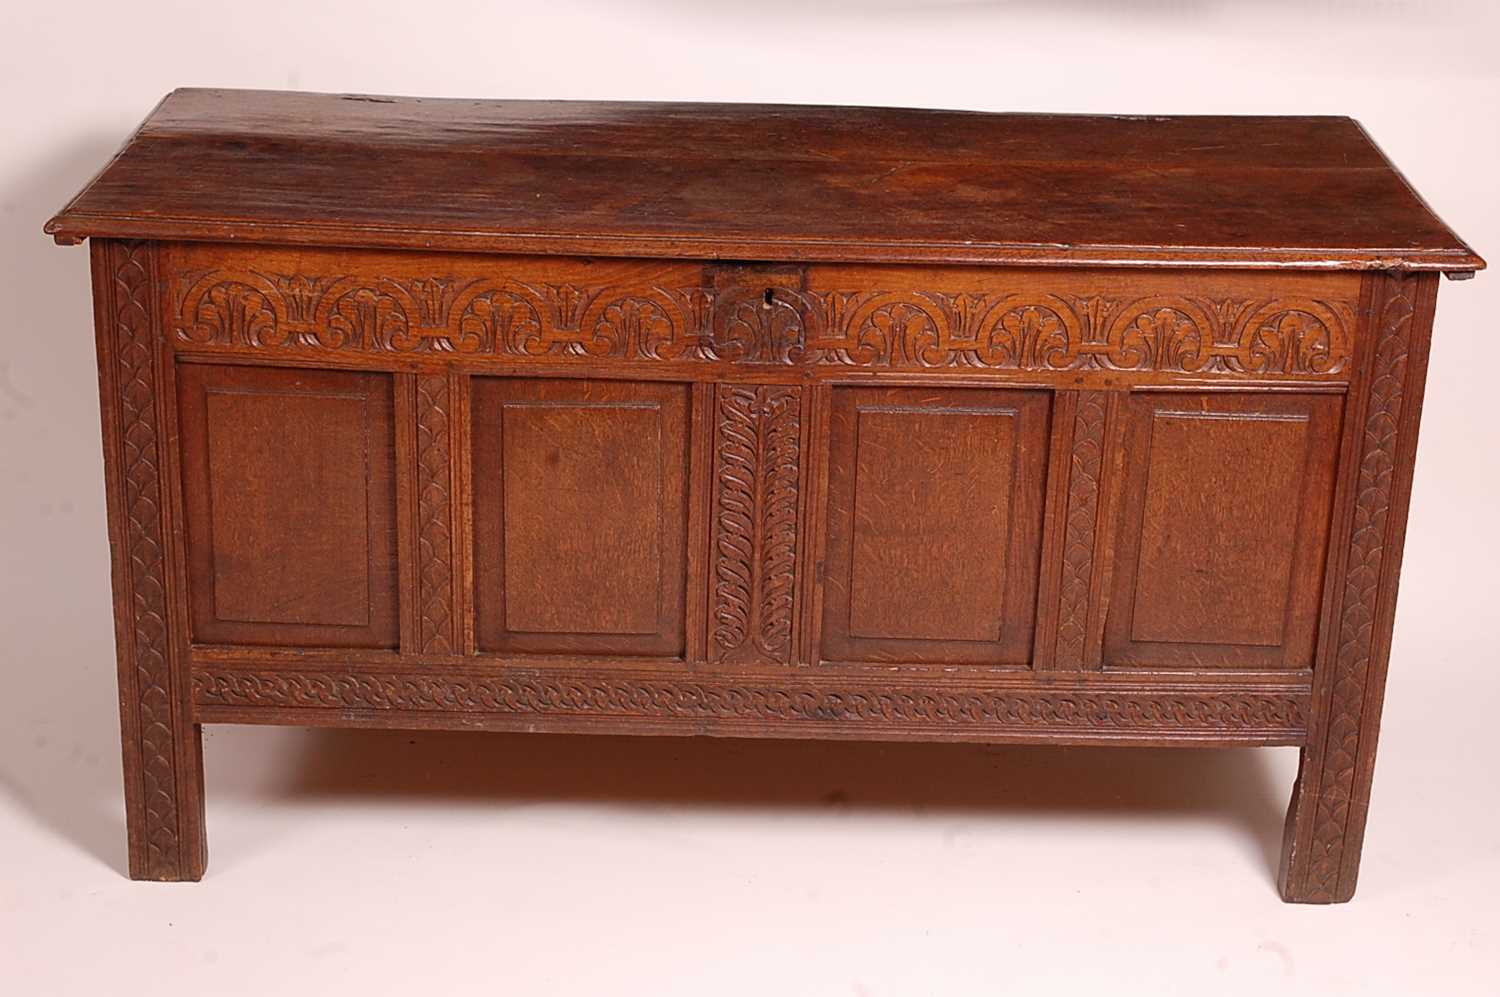 A circa 1700 joined oak four-panel coffer, the two plank top on original steel loop hinges, the